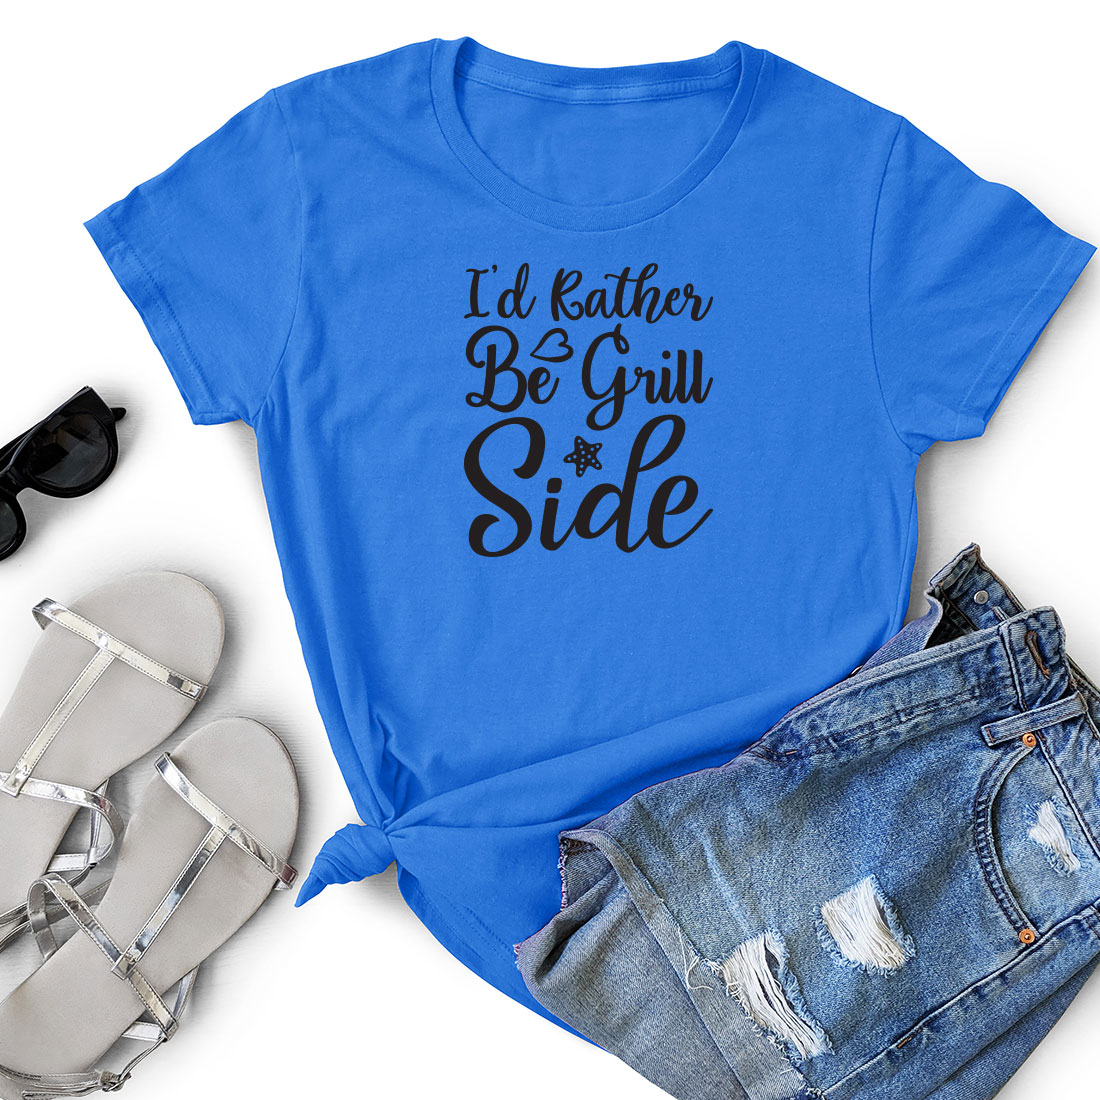 T - shirt that says i'd rather be a grill side.